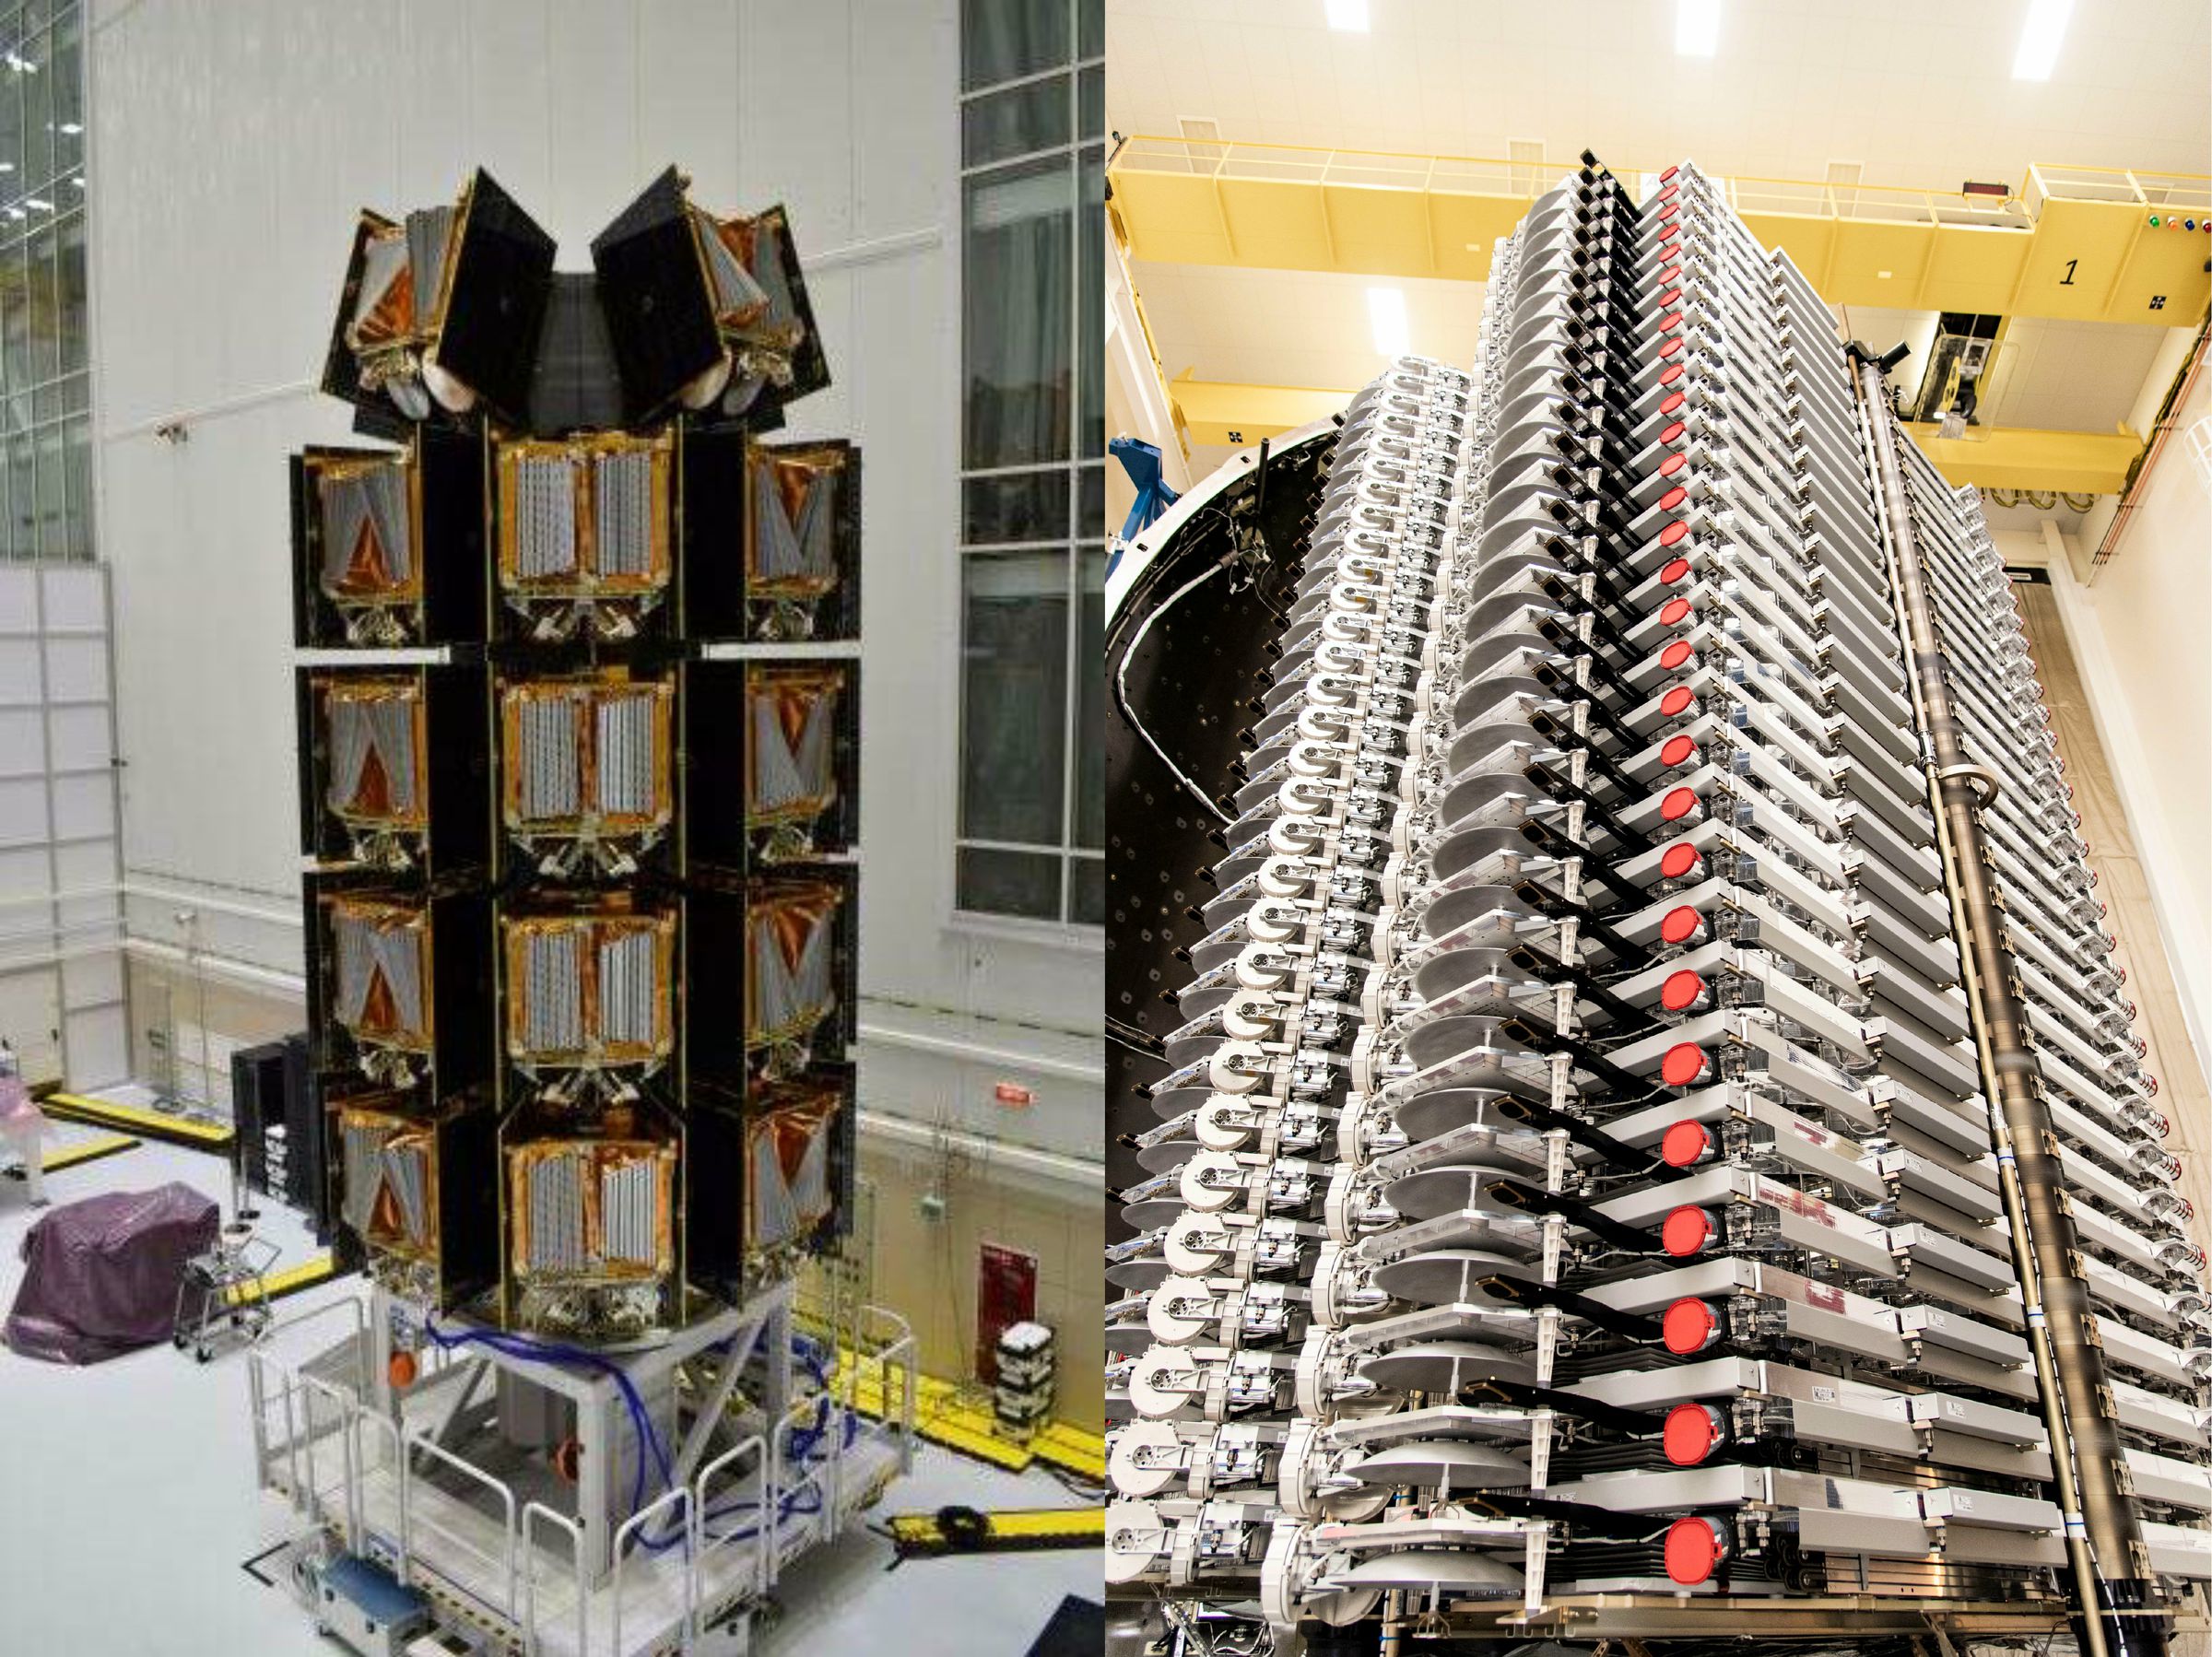 OneWeb satellites (left) launch in batches of 36. SpaceX’s Starlink satellites (right) launch in batches of 60.